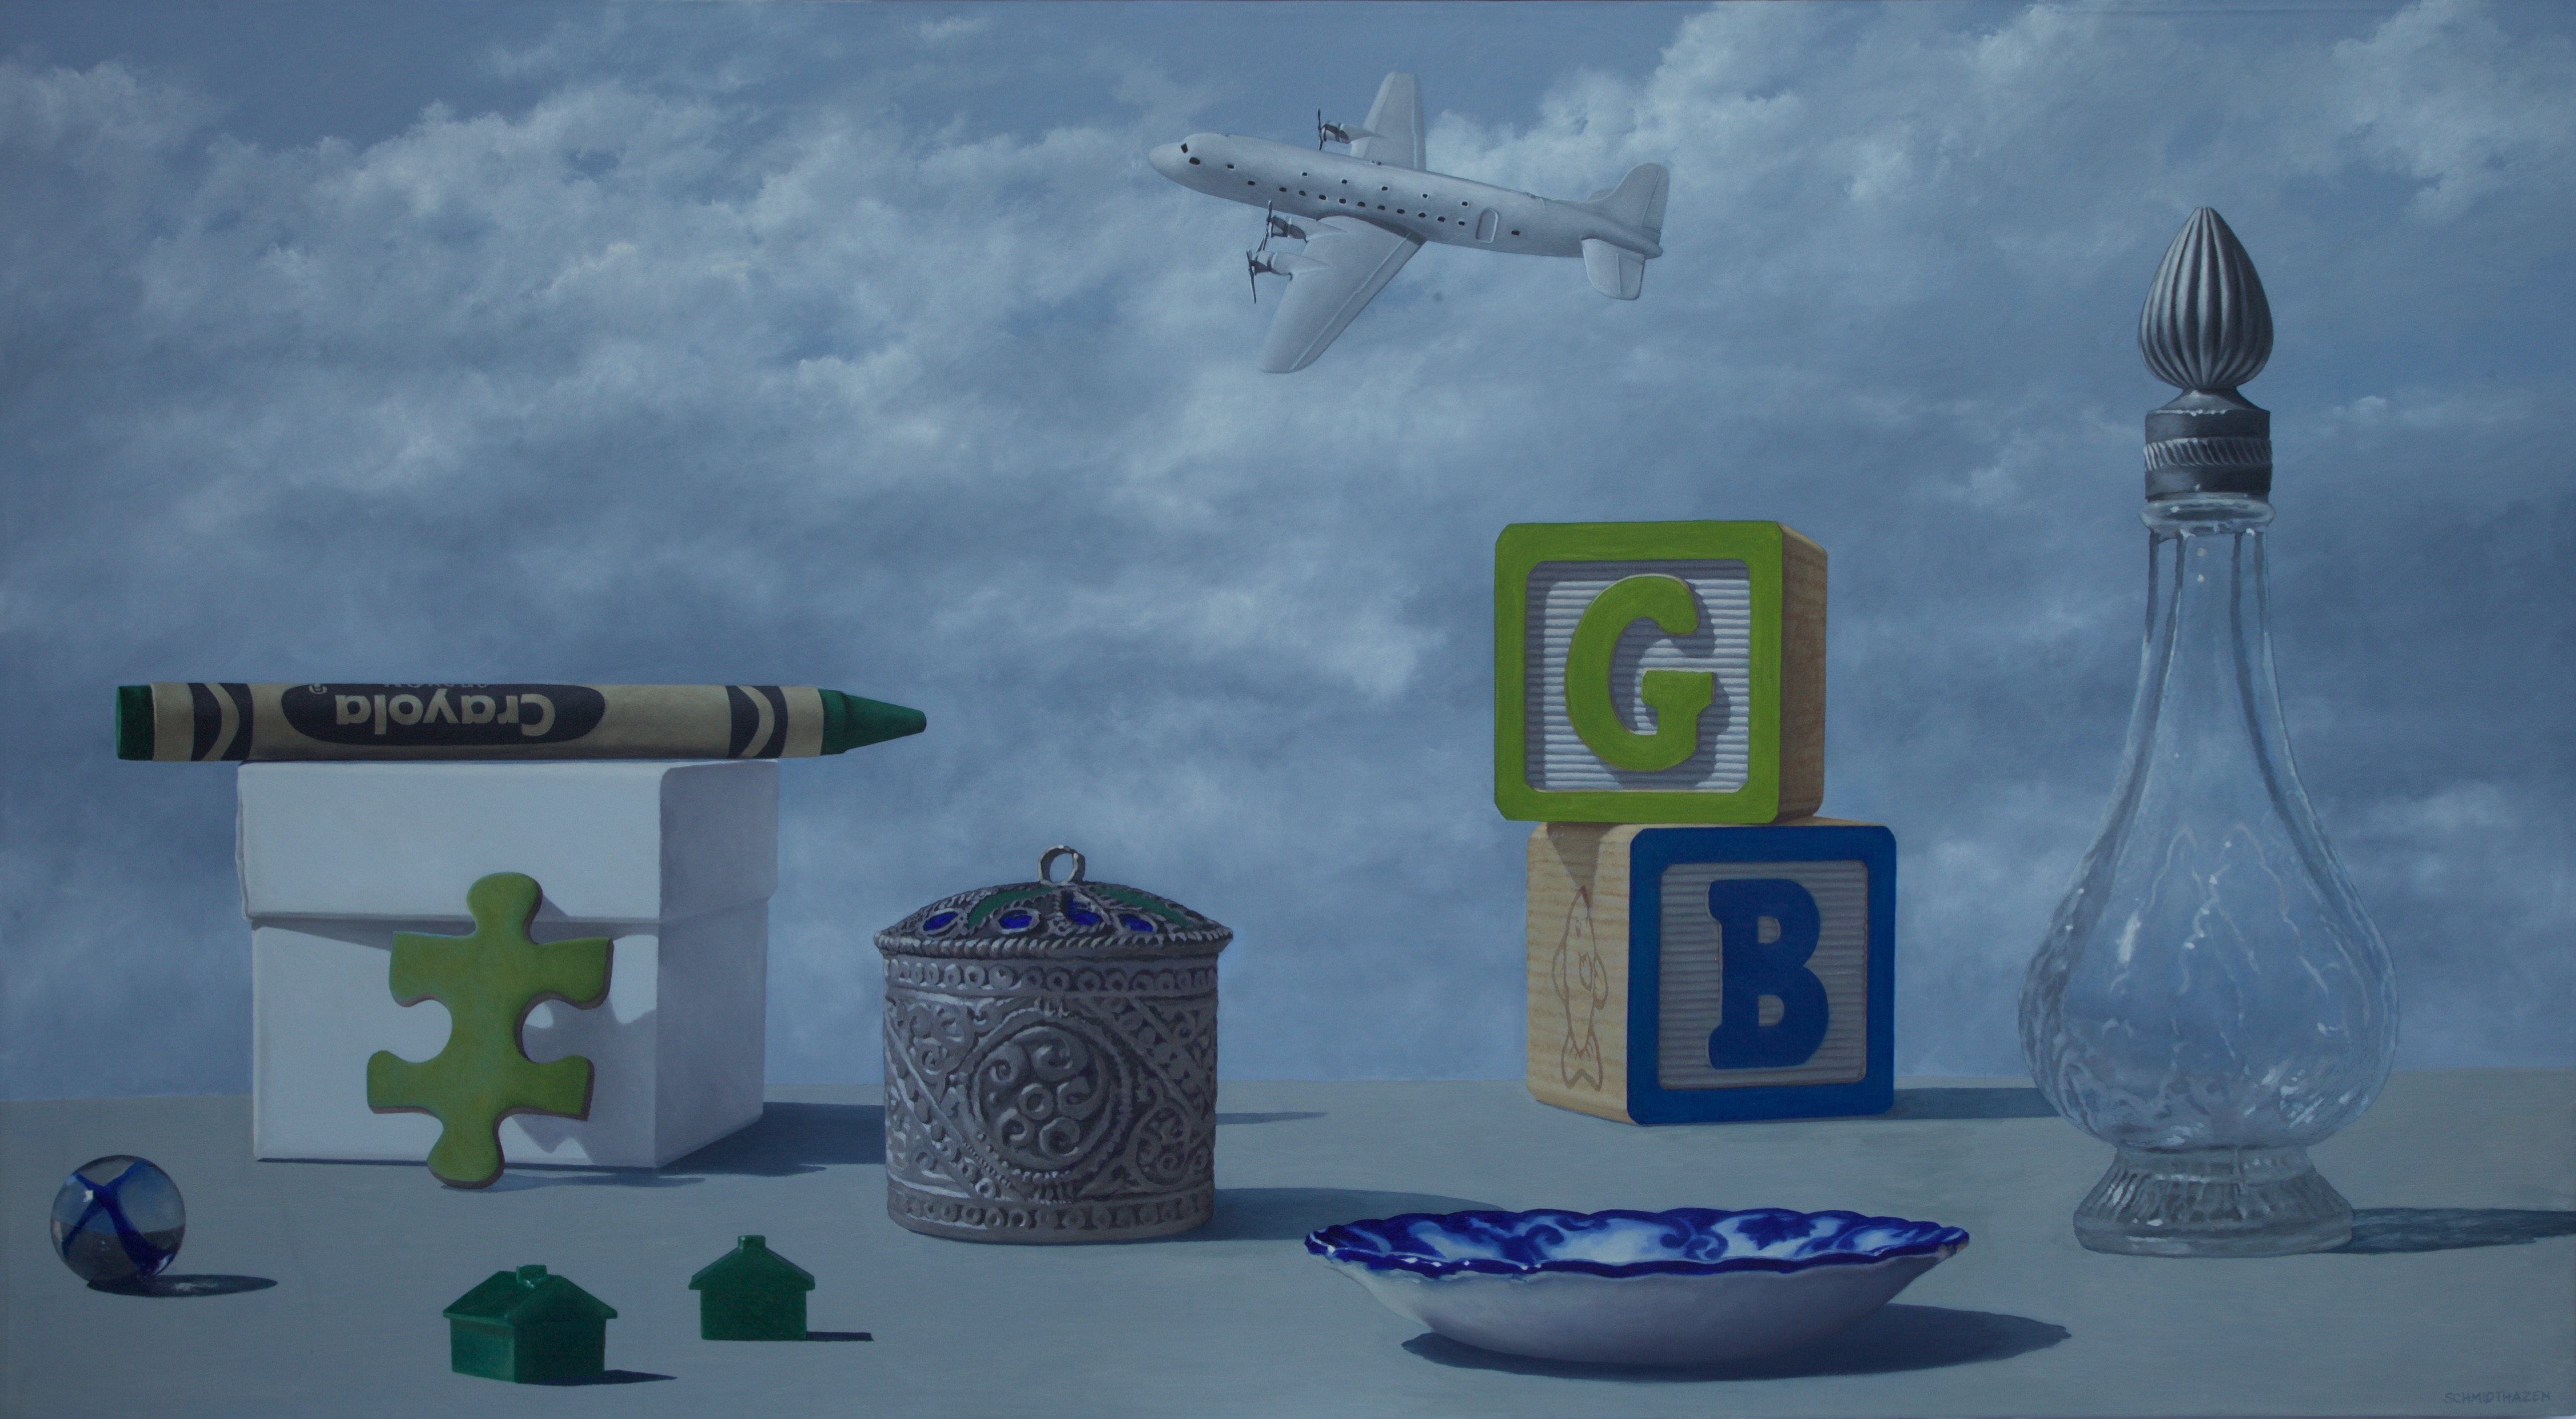 still life landscape with objects, sky and airplane 